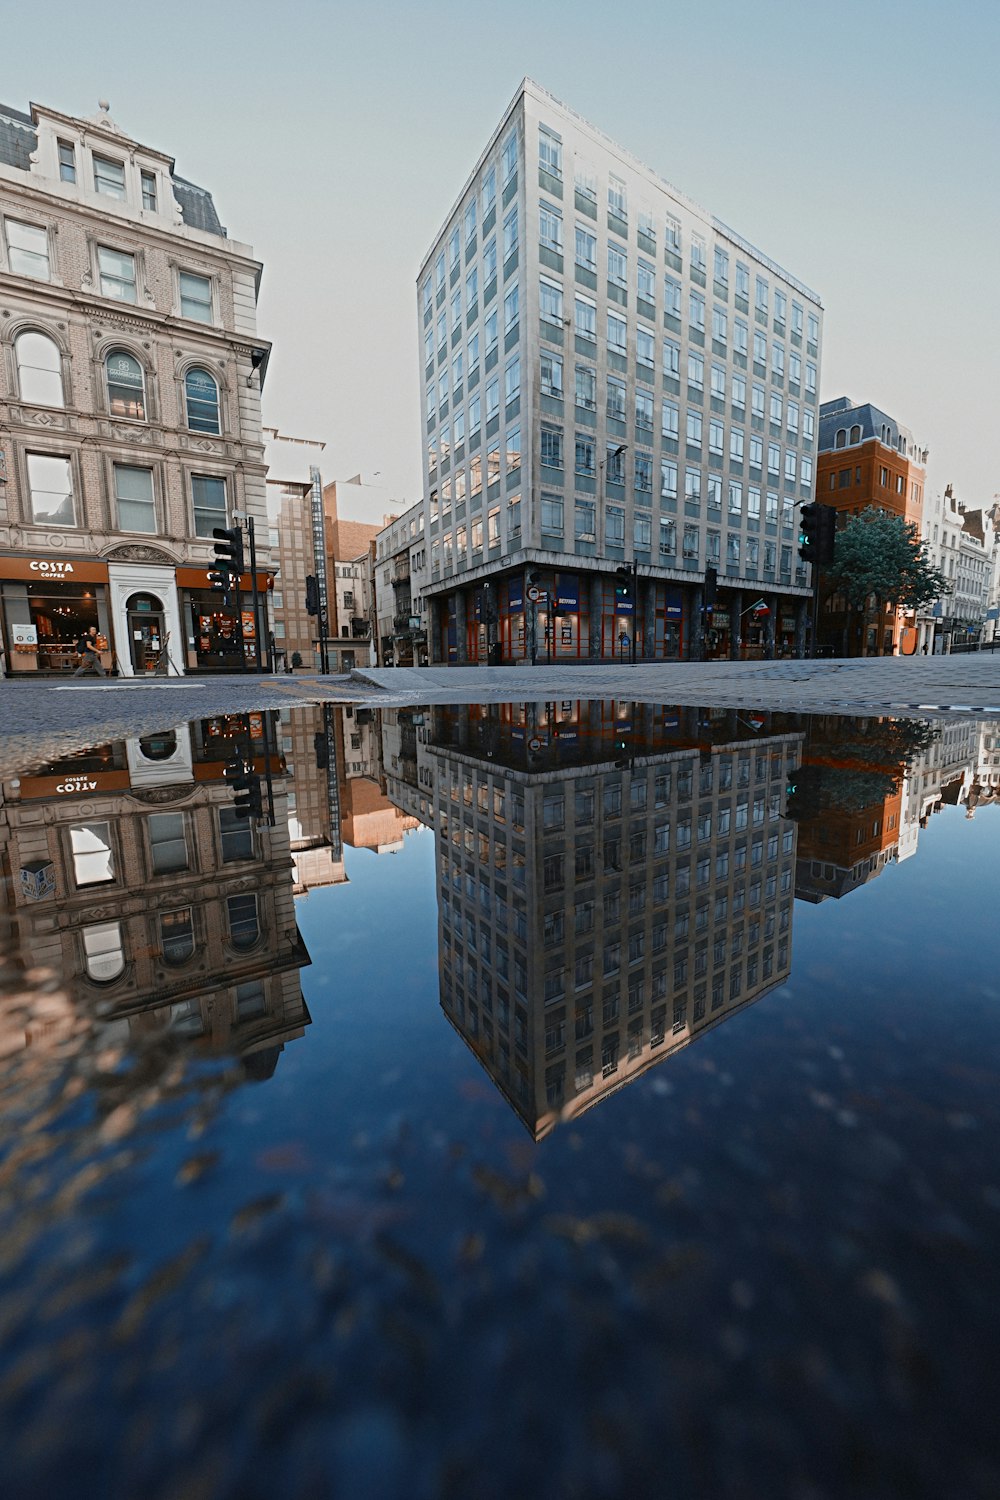 reflection of building on water during daytime